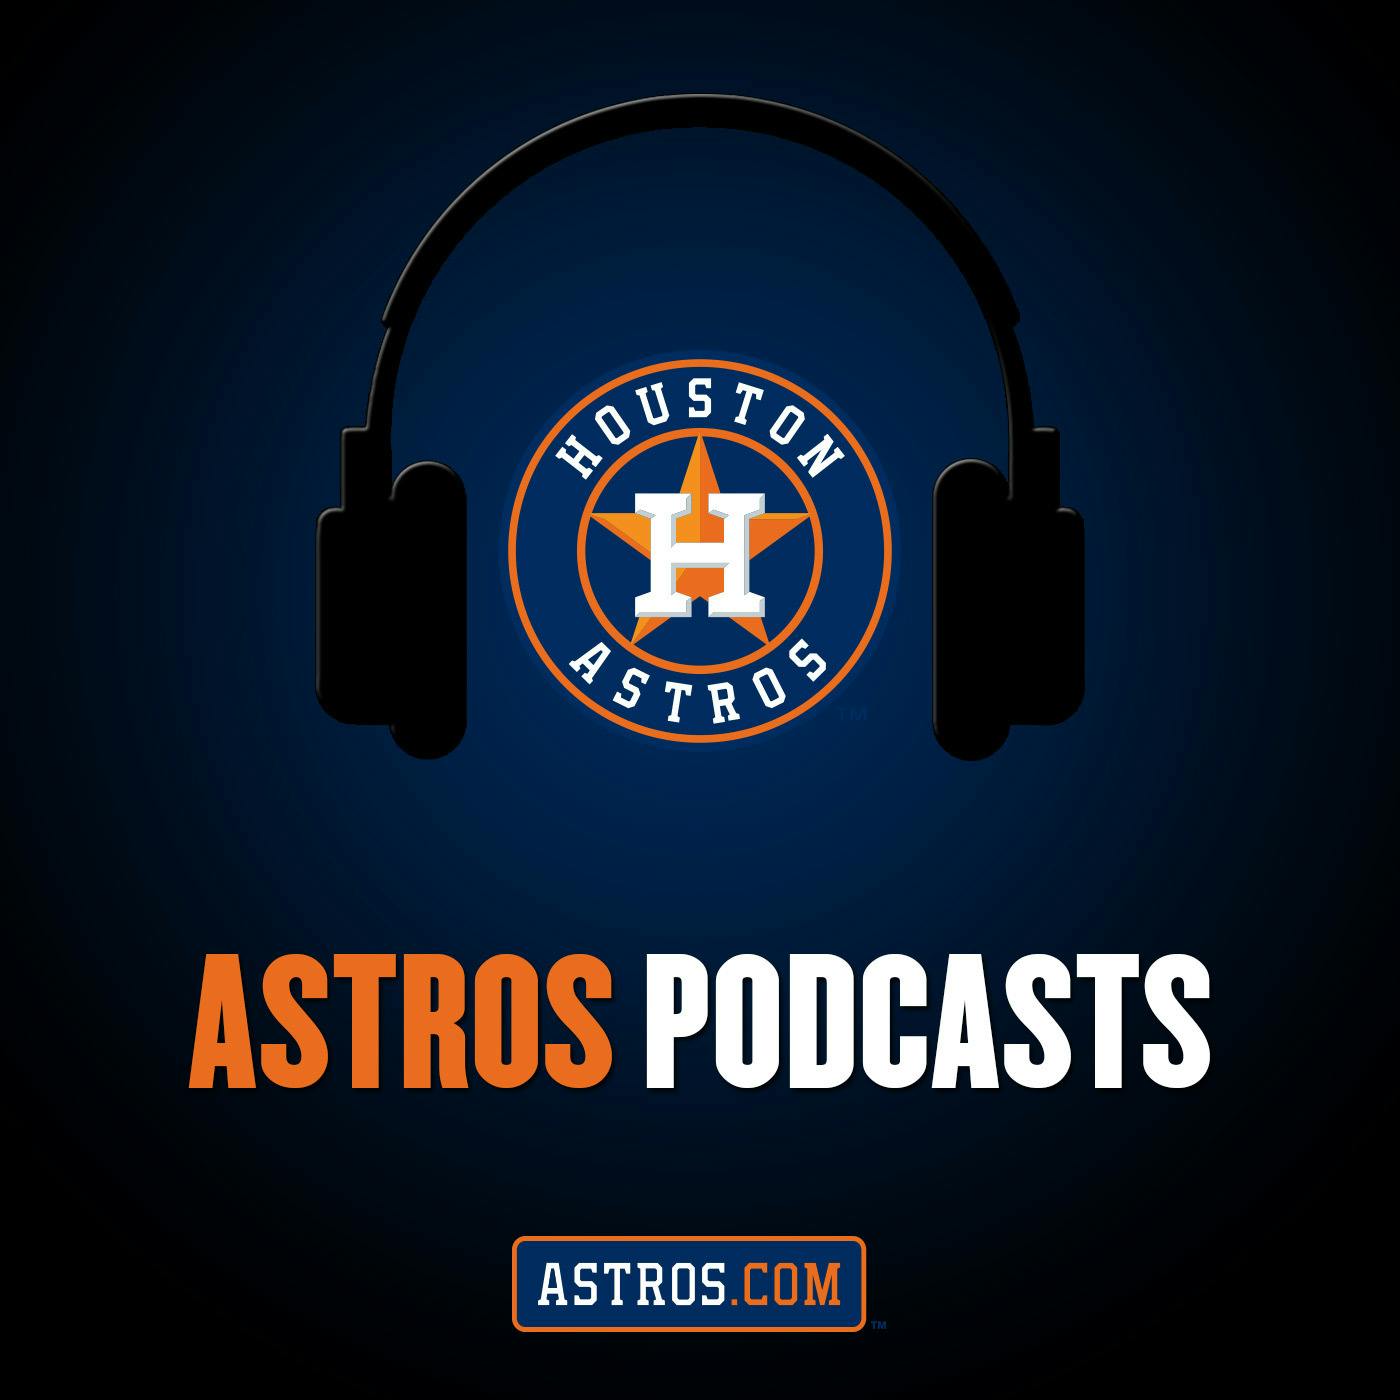 11/1 ASTROS PODCAST: Manager A.J. Hinch and General Manager Jeff Luhnow